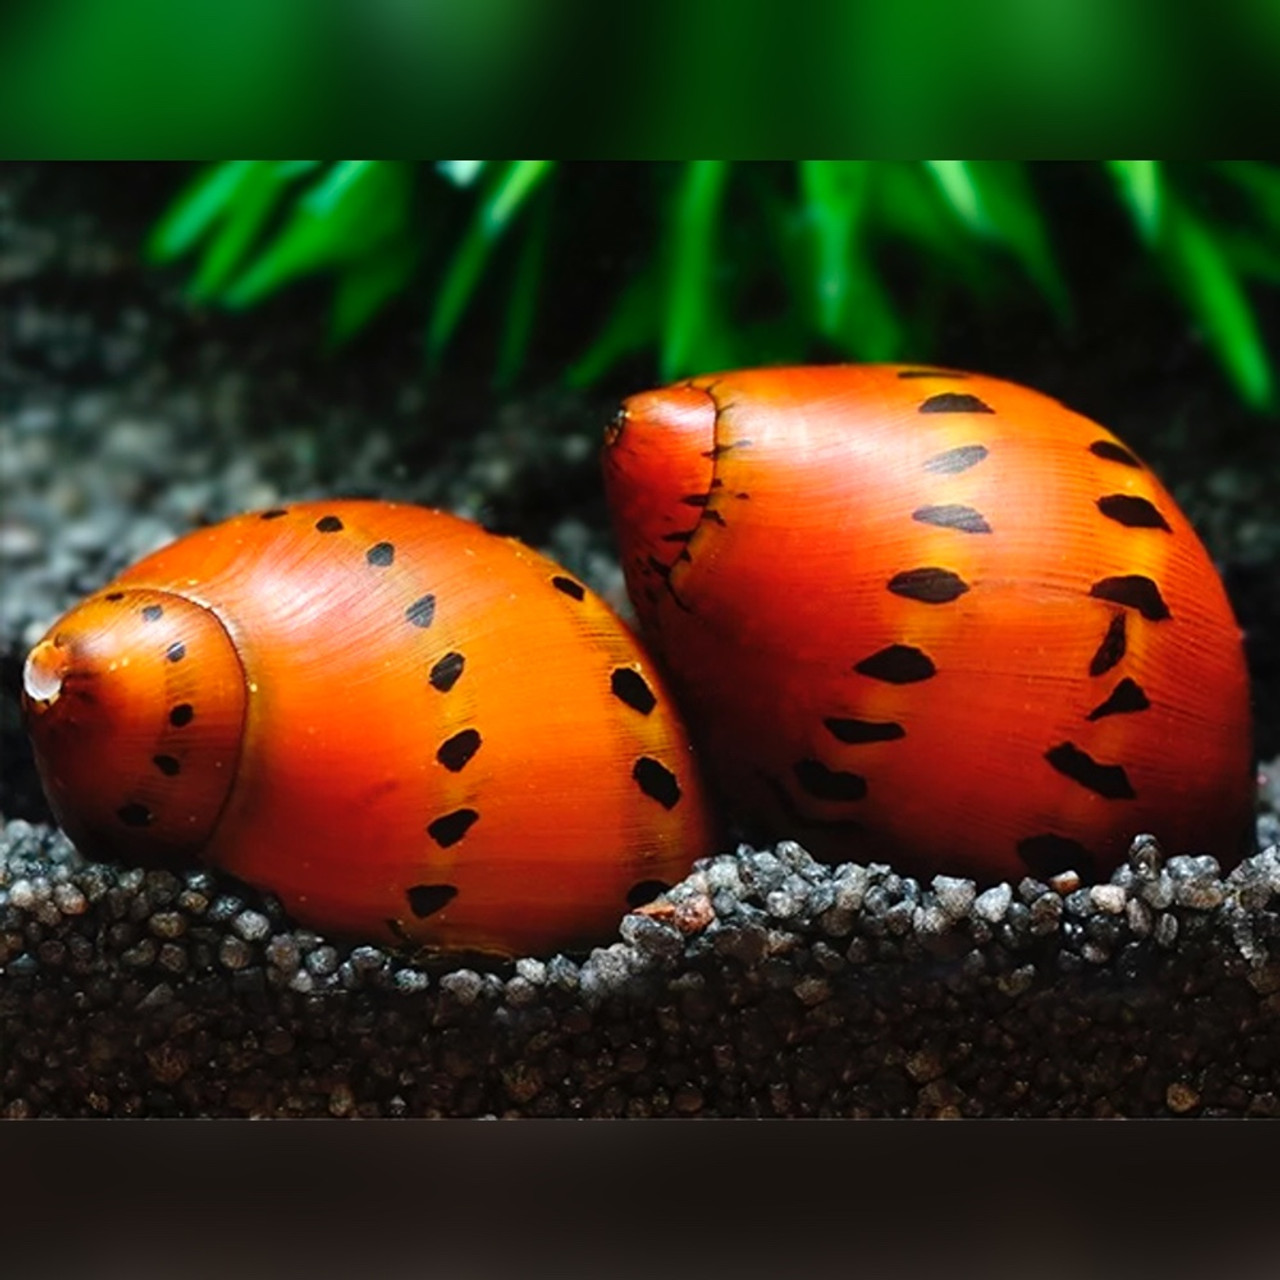 https://cdn11.bigcommerce.com/s-nzocnvfw4r/images/stencil/1280x1280/products/420/683/Red-Spotted-Nerite-Snail__52806.1710508848.jpg?c=1